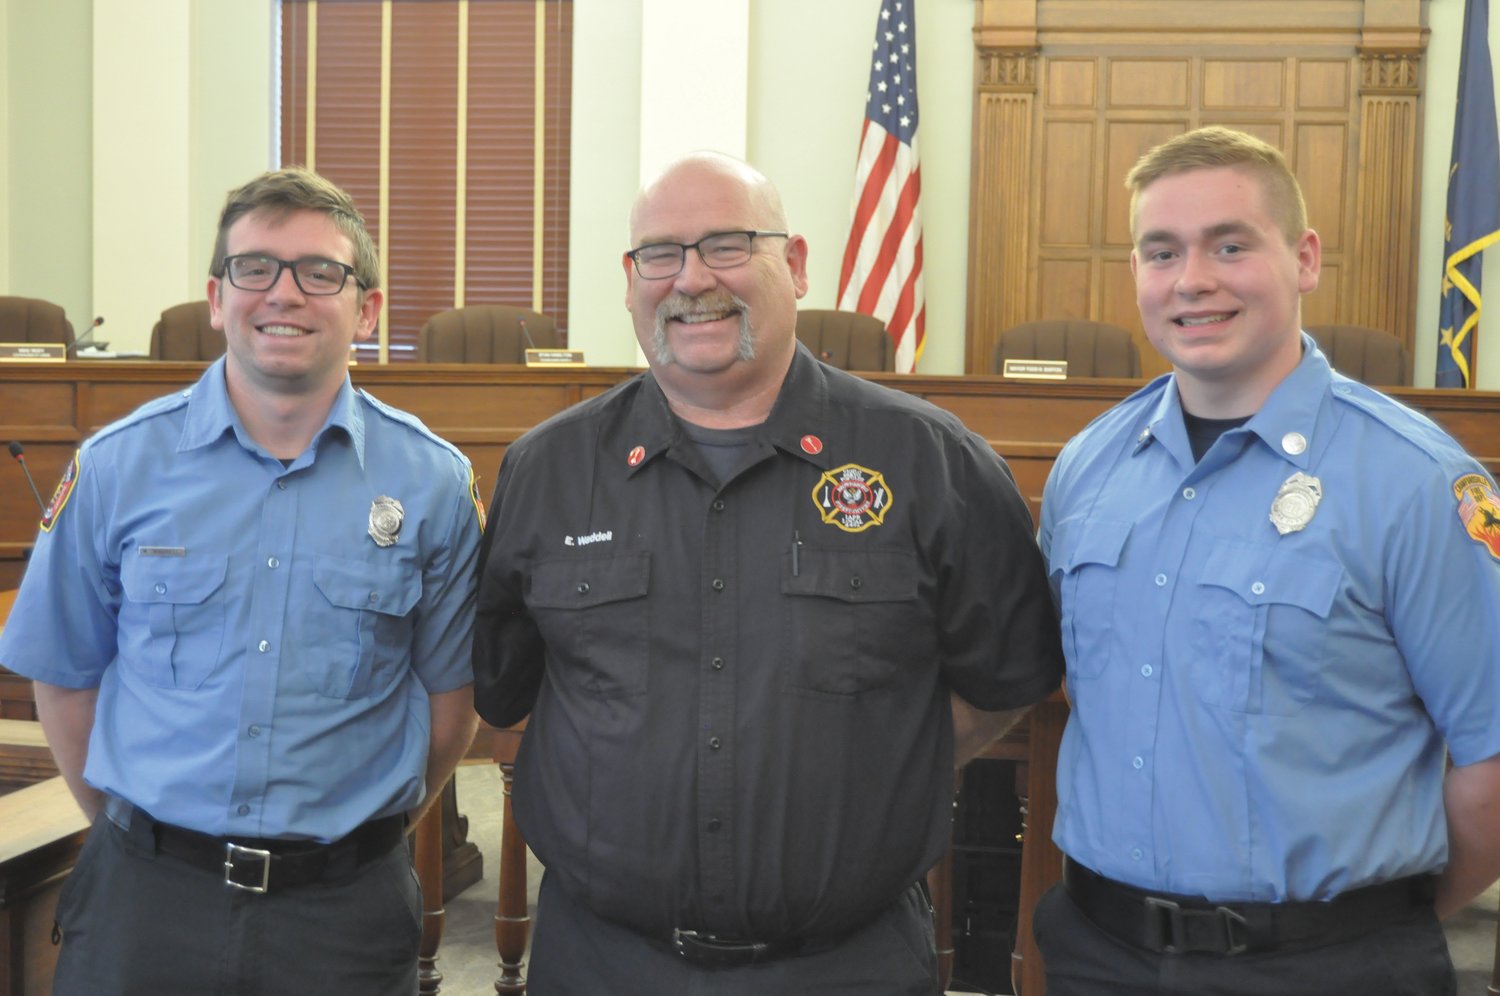 Gavin Waddell, right, stands with his father Buck and brother Wyatt in the City Building on Wednesday. Gavin Waddell was just sworn in as a Crawfordsville firefighter/EMT.